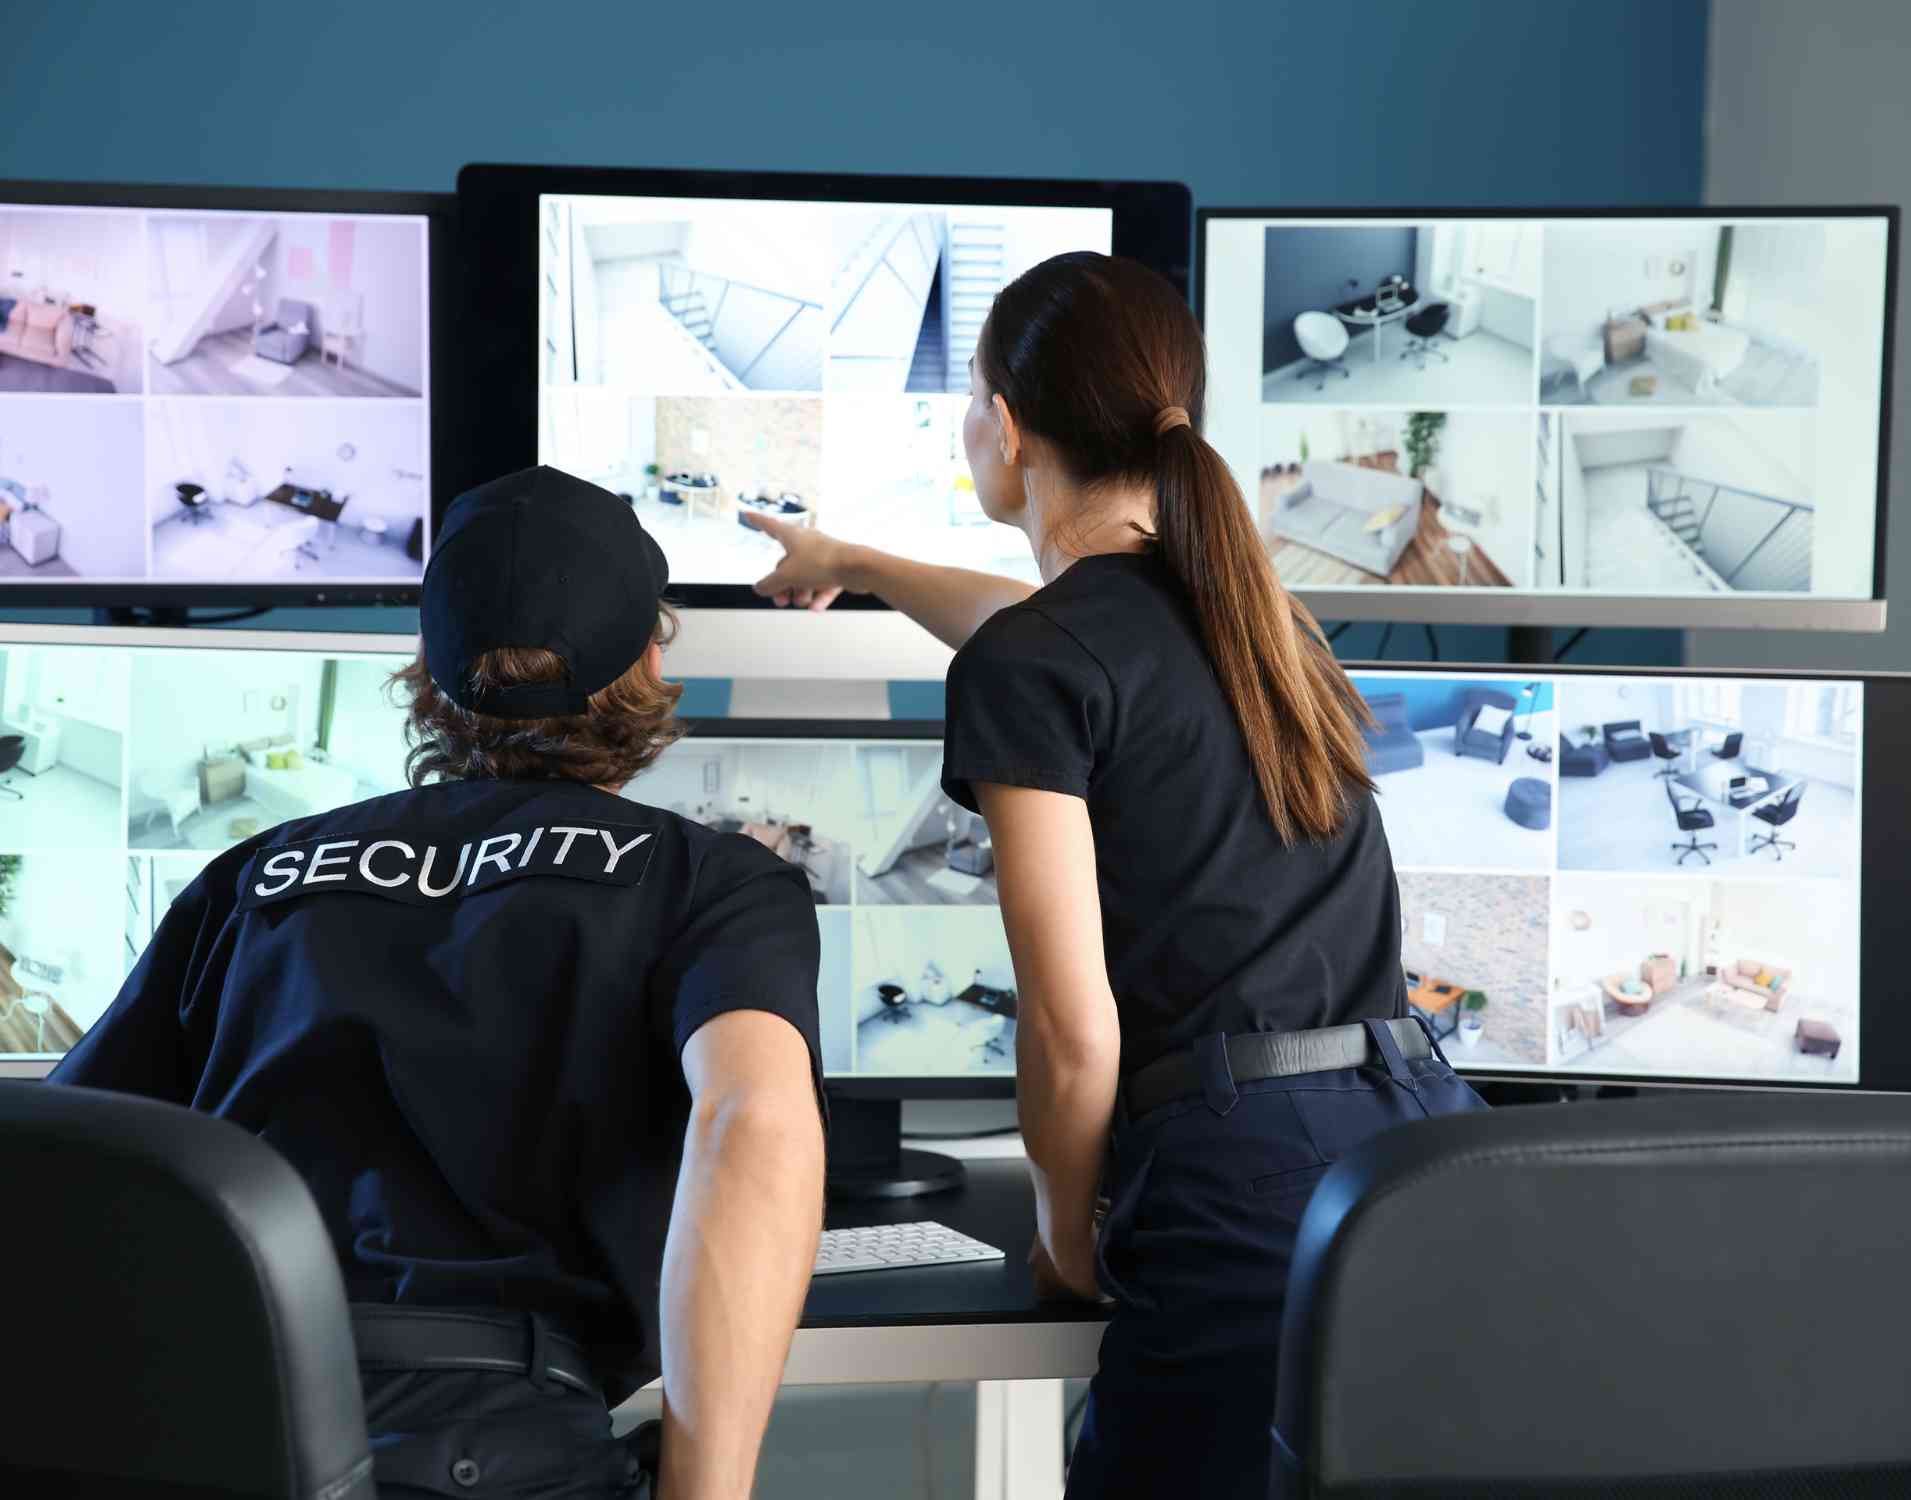 <h4>Are you trying to find a firm that offers a monitored CCTV security system?</h4>